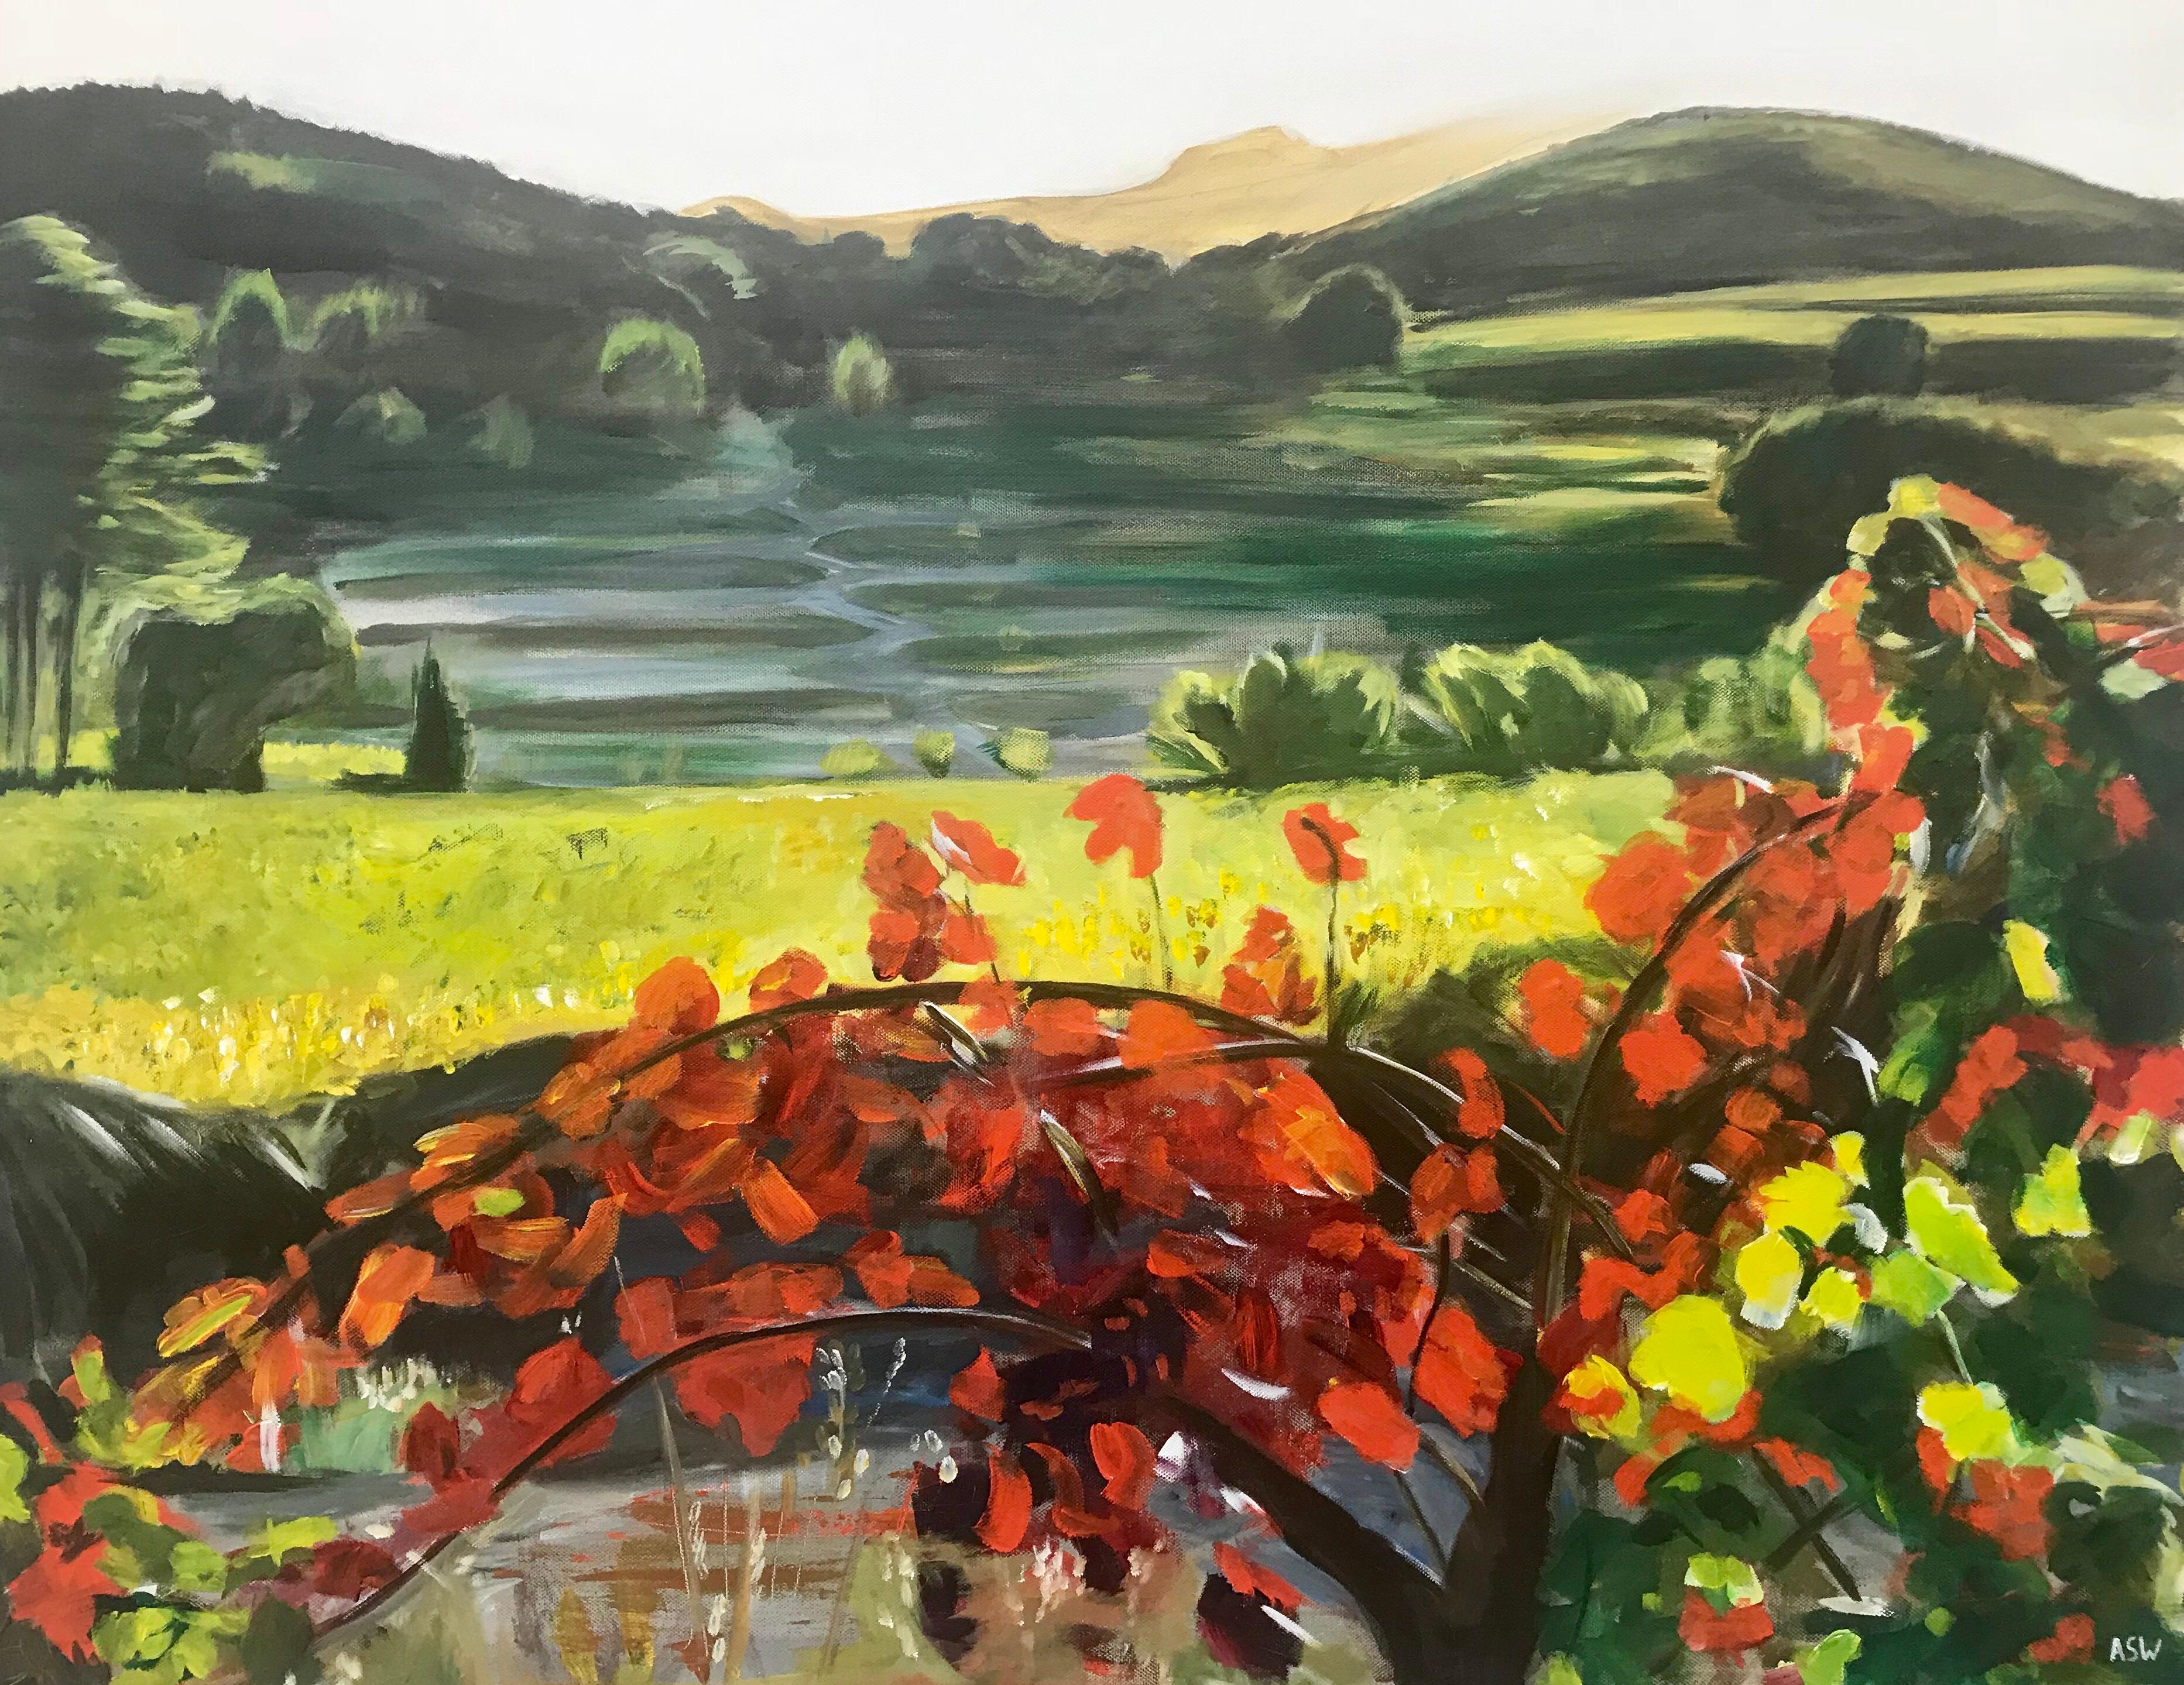 Angela Wakefield Figurative Painting - Painting of Hot Sunny Vineyard in Spain Countryside by English Landscape Artist